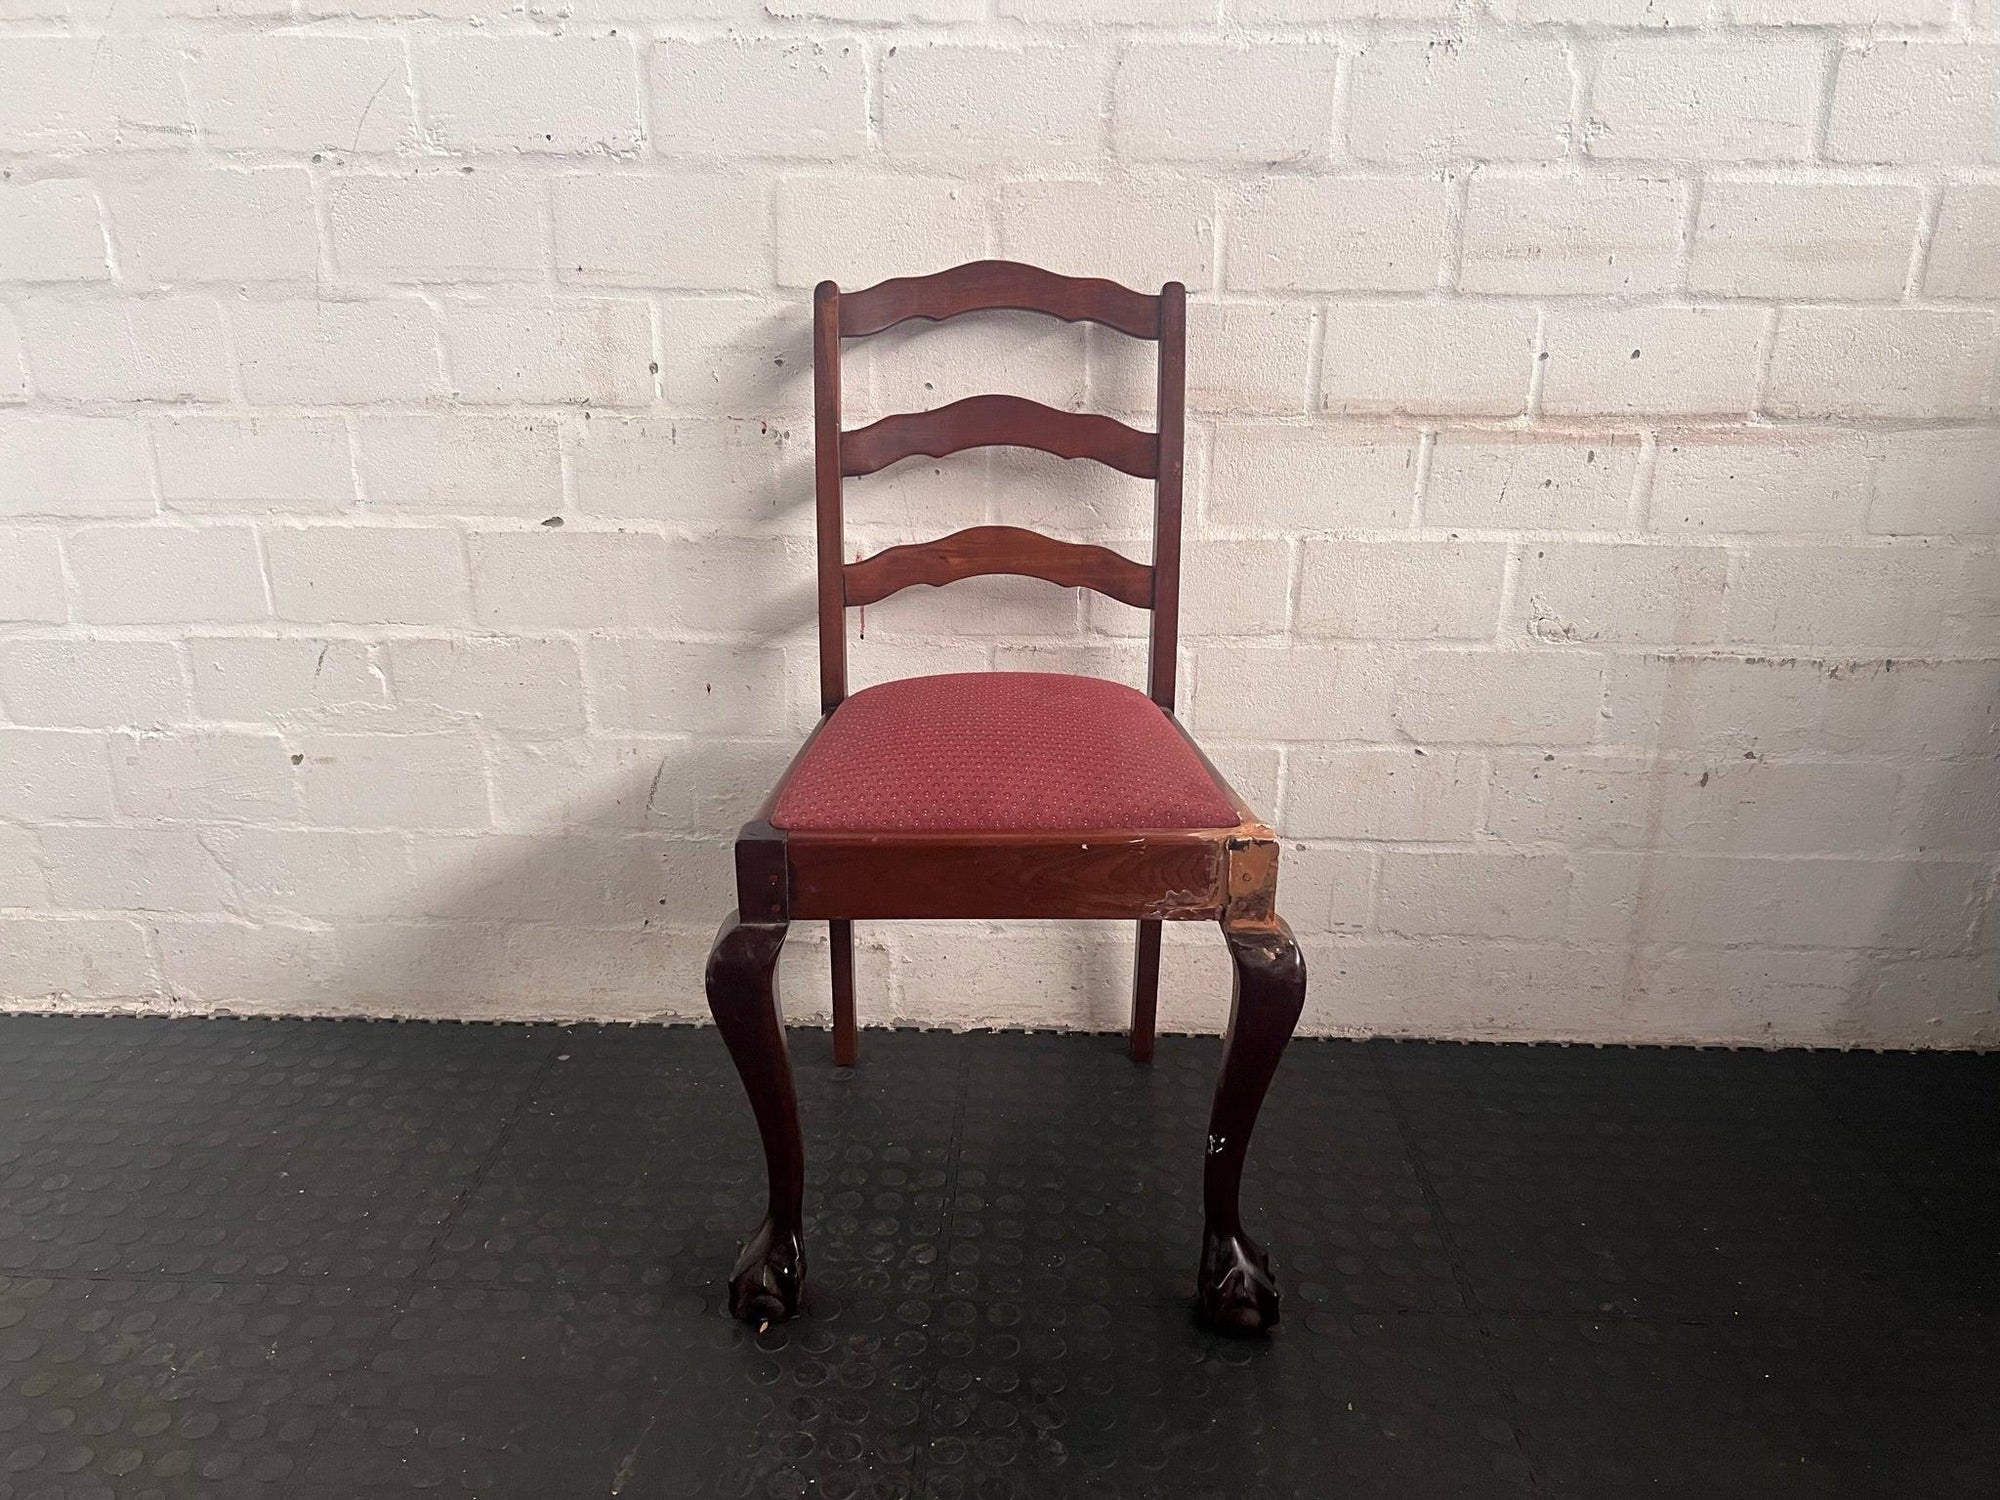 Ball and Claw Red Cushion Dining Chair (Damage To The Leg)